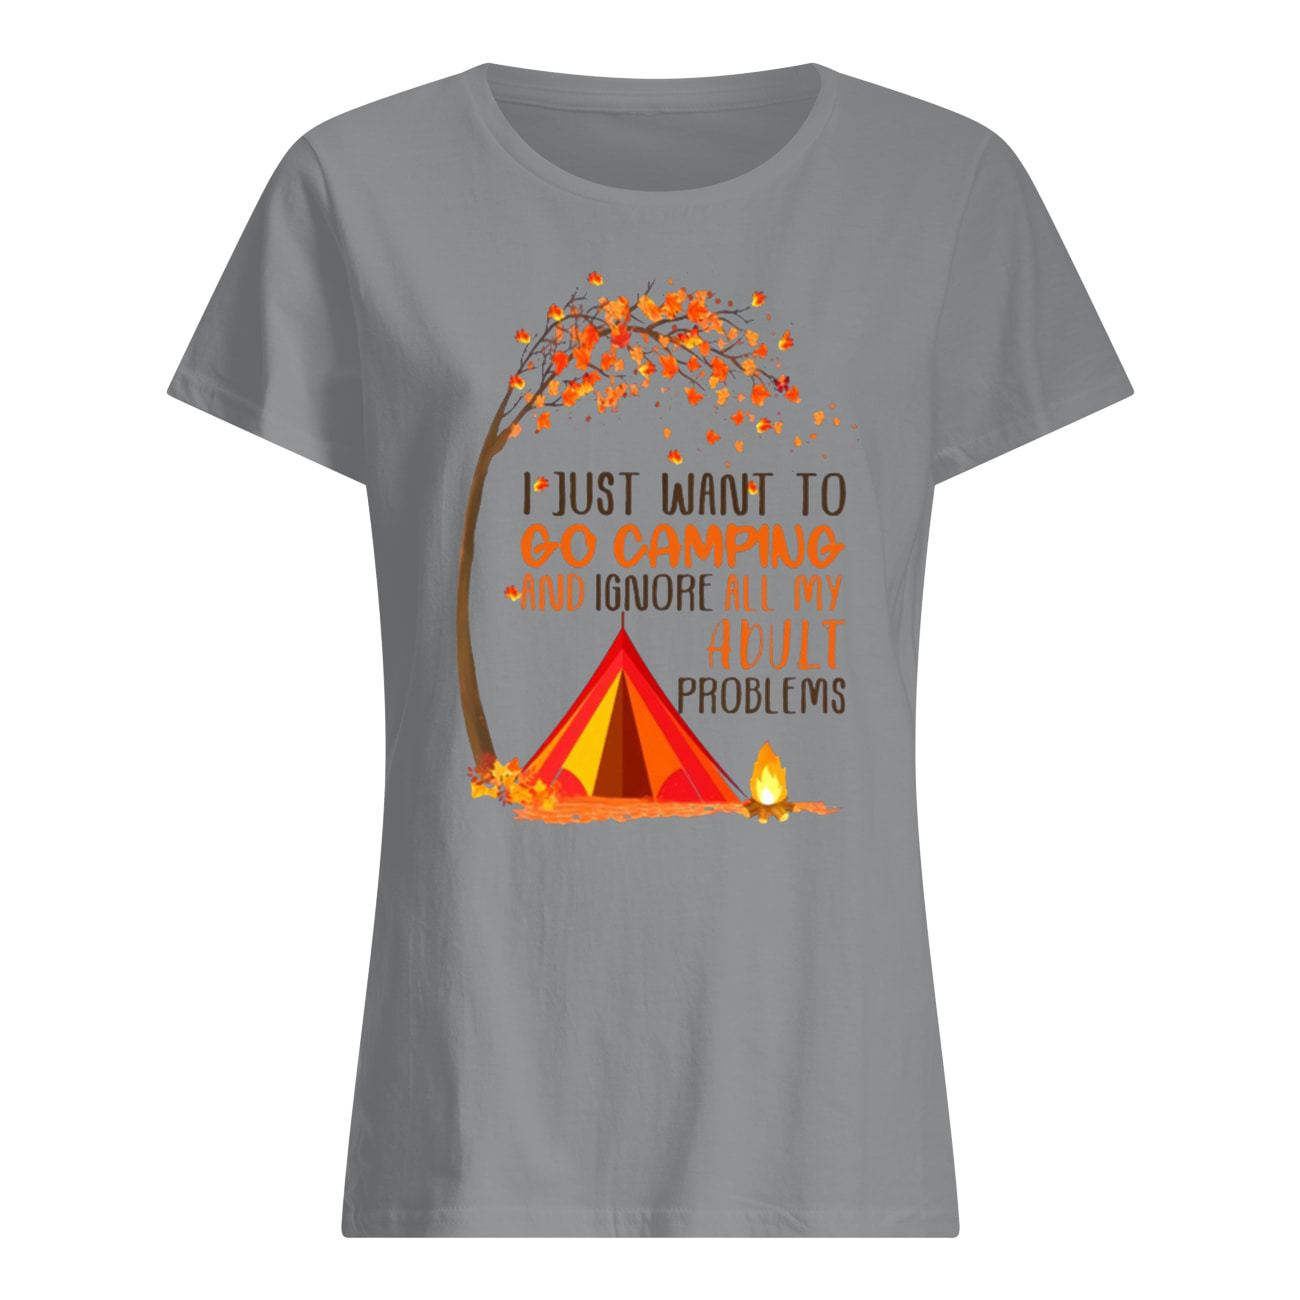 I just want to go camping and ignore all of my adult problems womens shirt